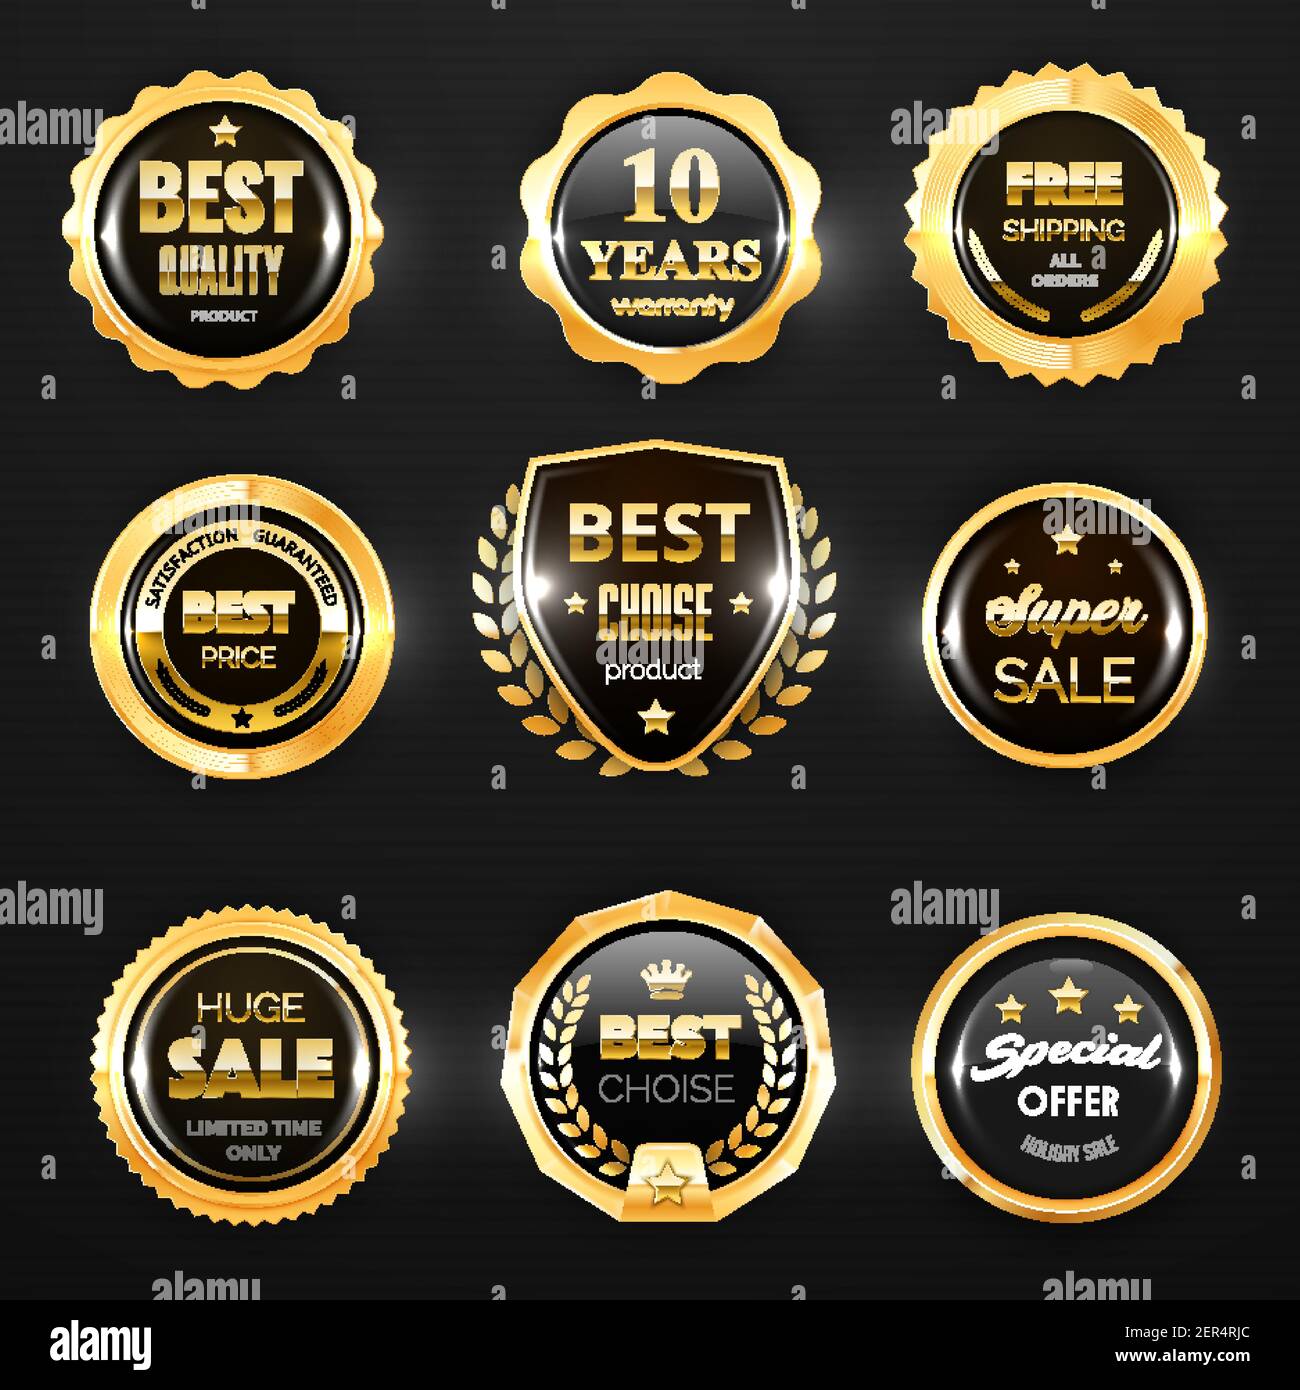 https://c8.alamy.com/comp/2ER4RJC/gold-badge-label-and-stamp-seal-3d-vector-icons-premium-quality-medals-best-choice-and-price-special-sale-offer-and-guarantee-certificate-business-2ER4RJC.jpg